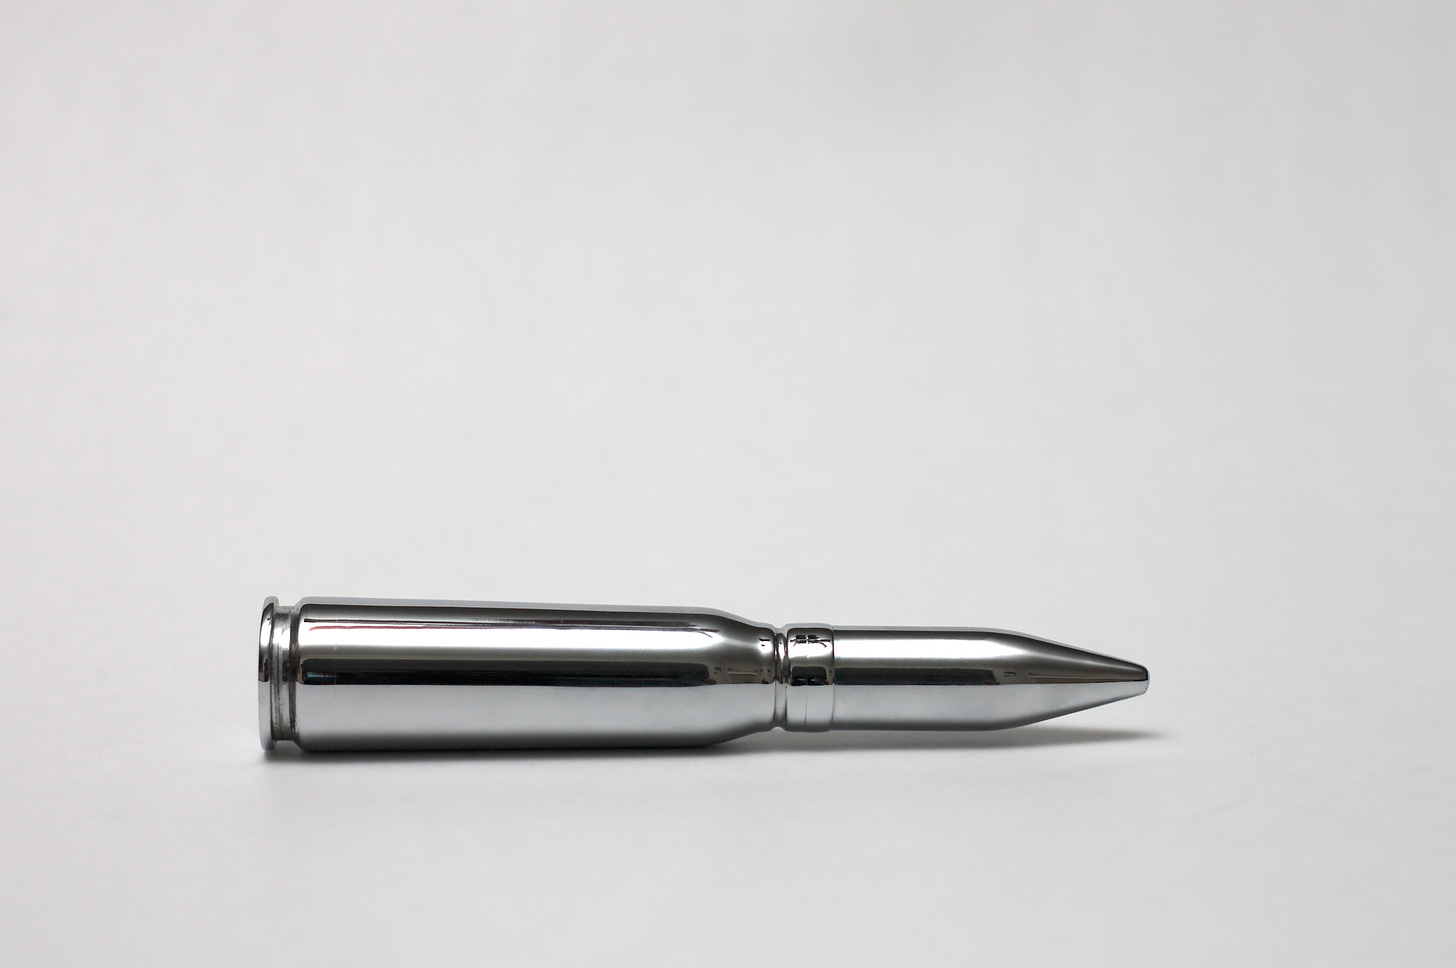 A silver bullet on a white background.